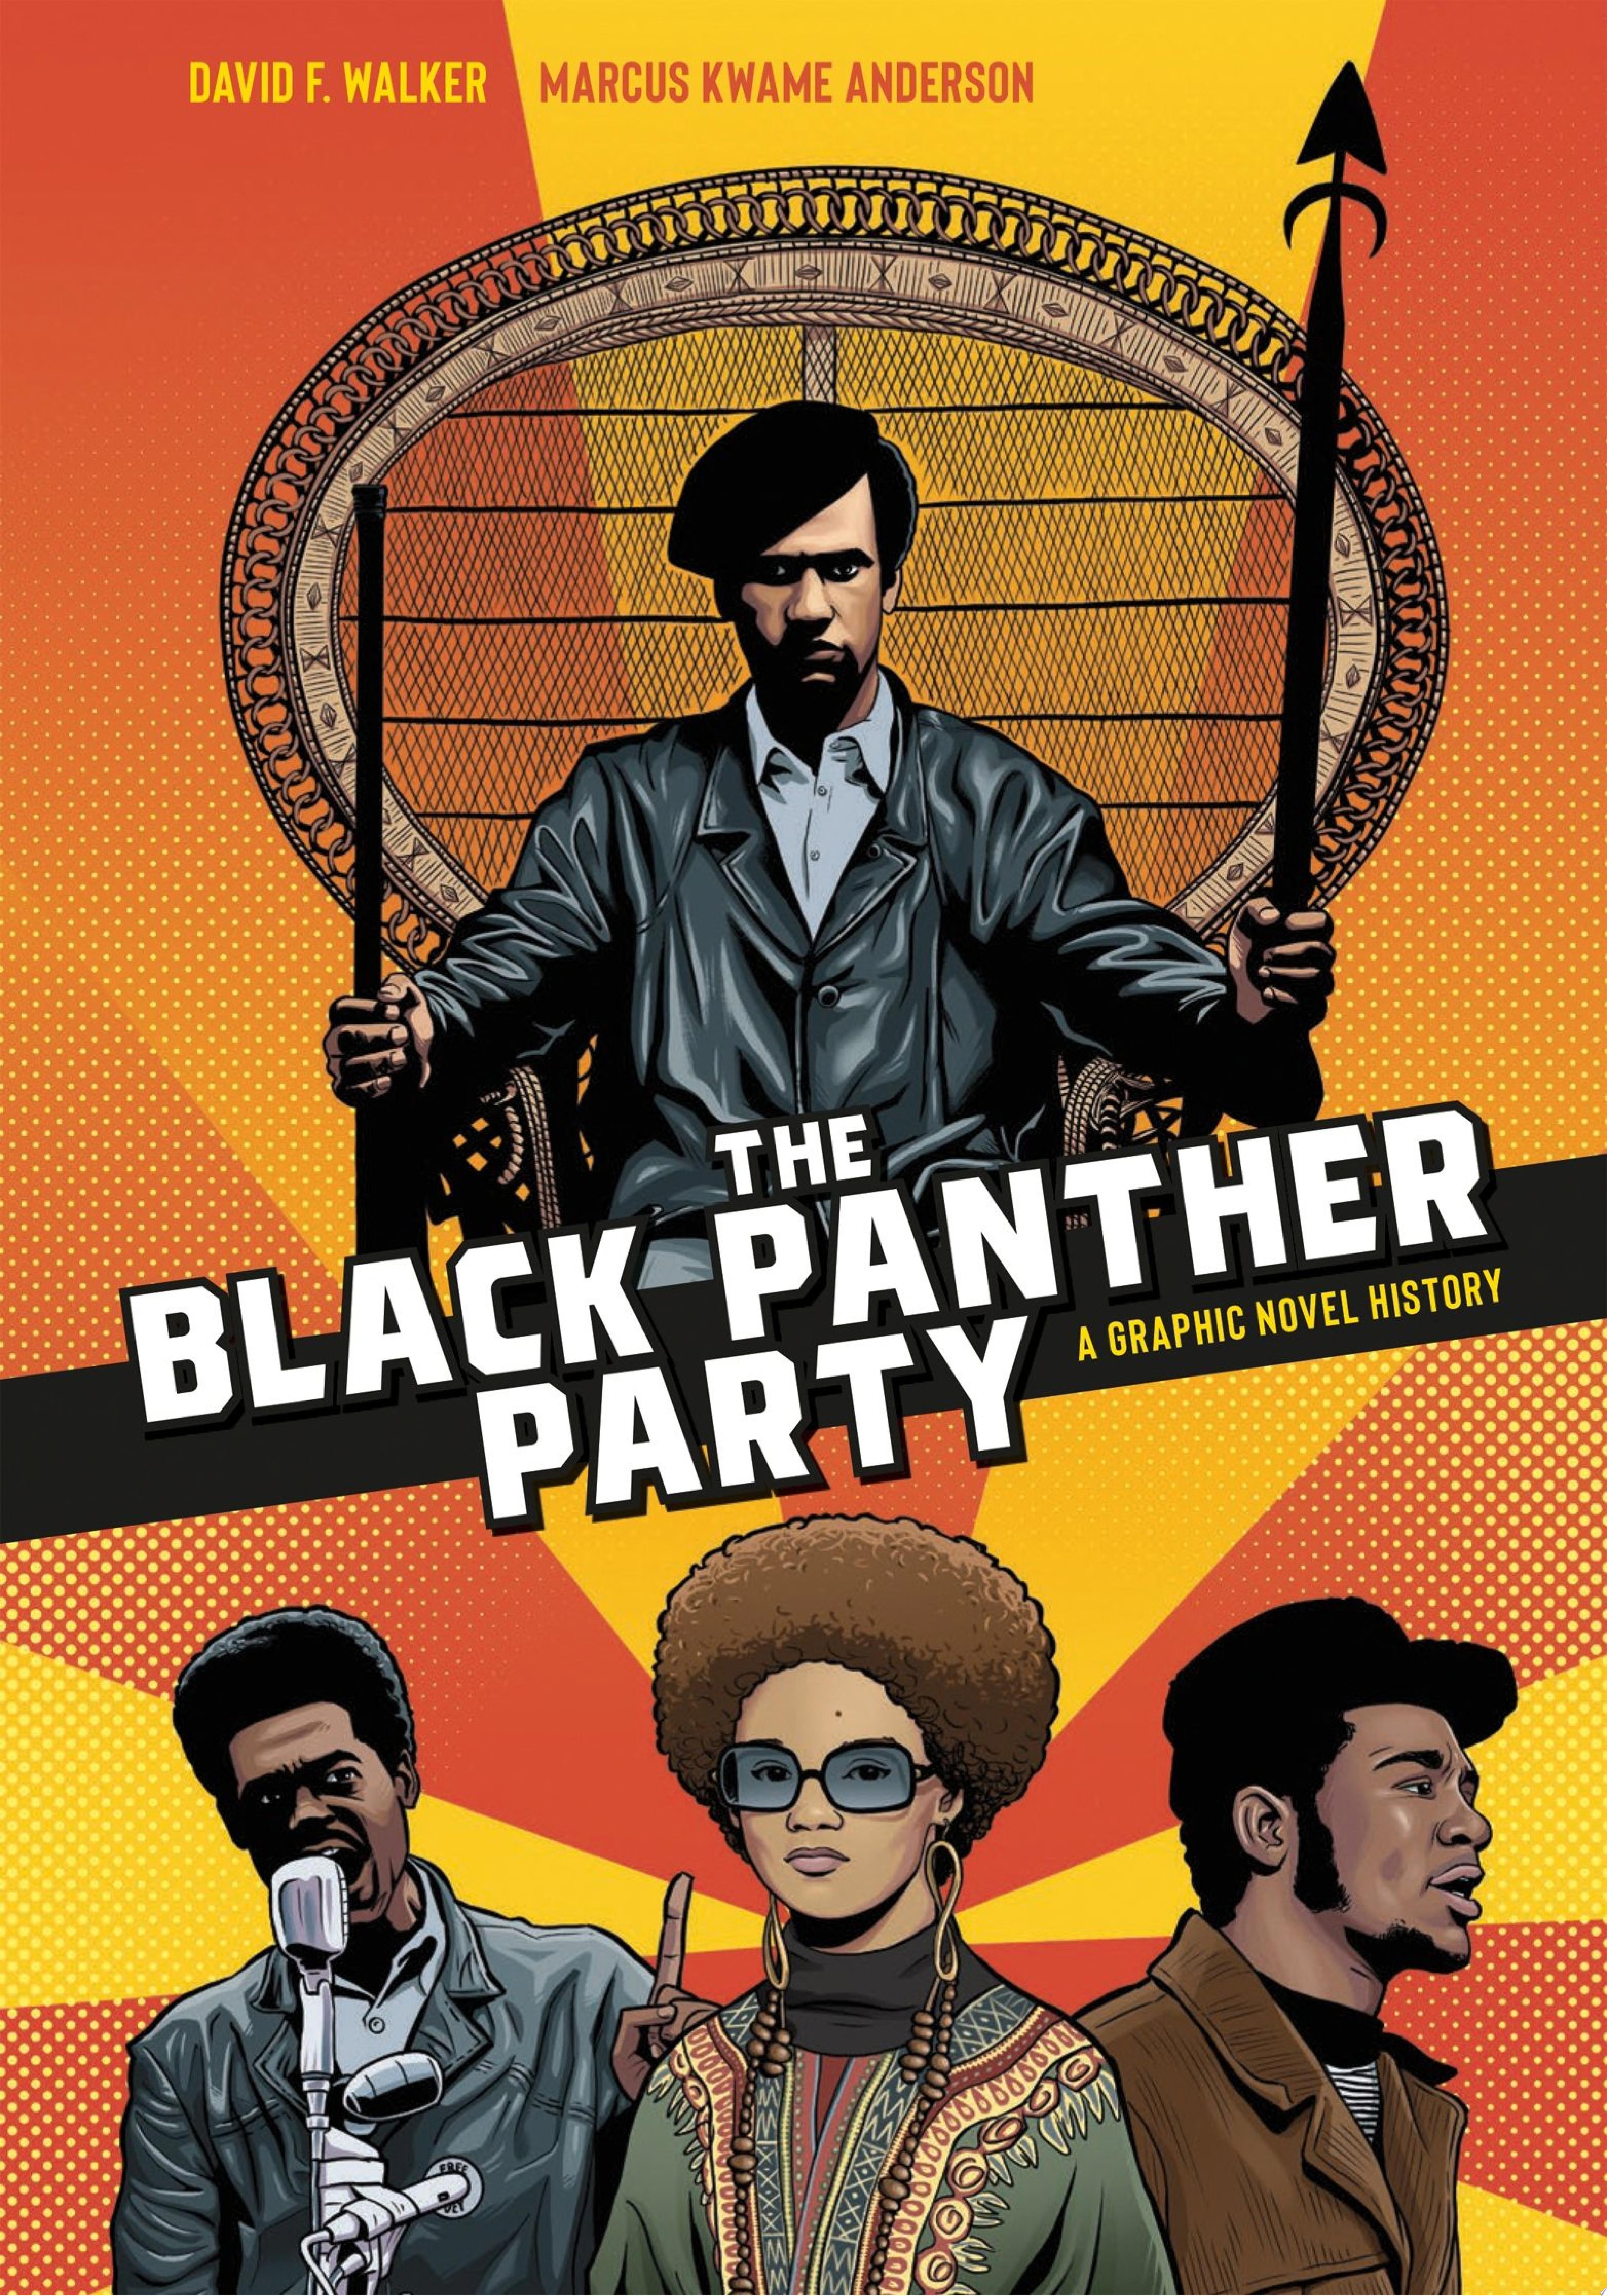 Image for "The Black Panther Party"